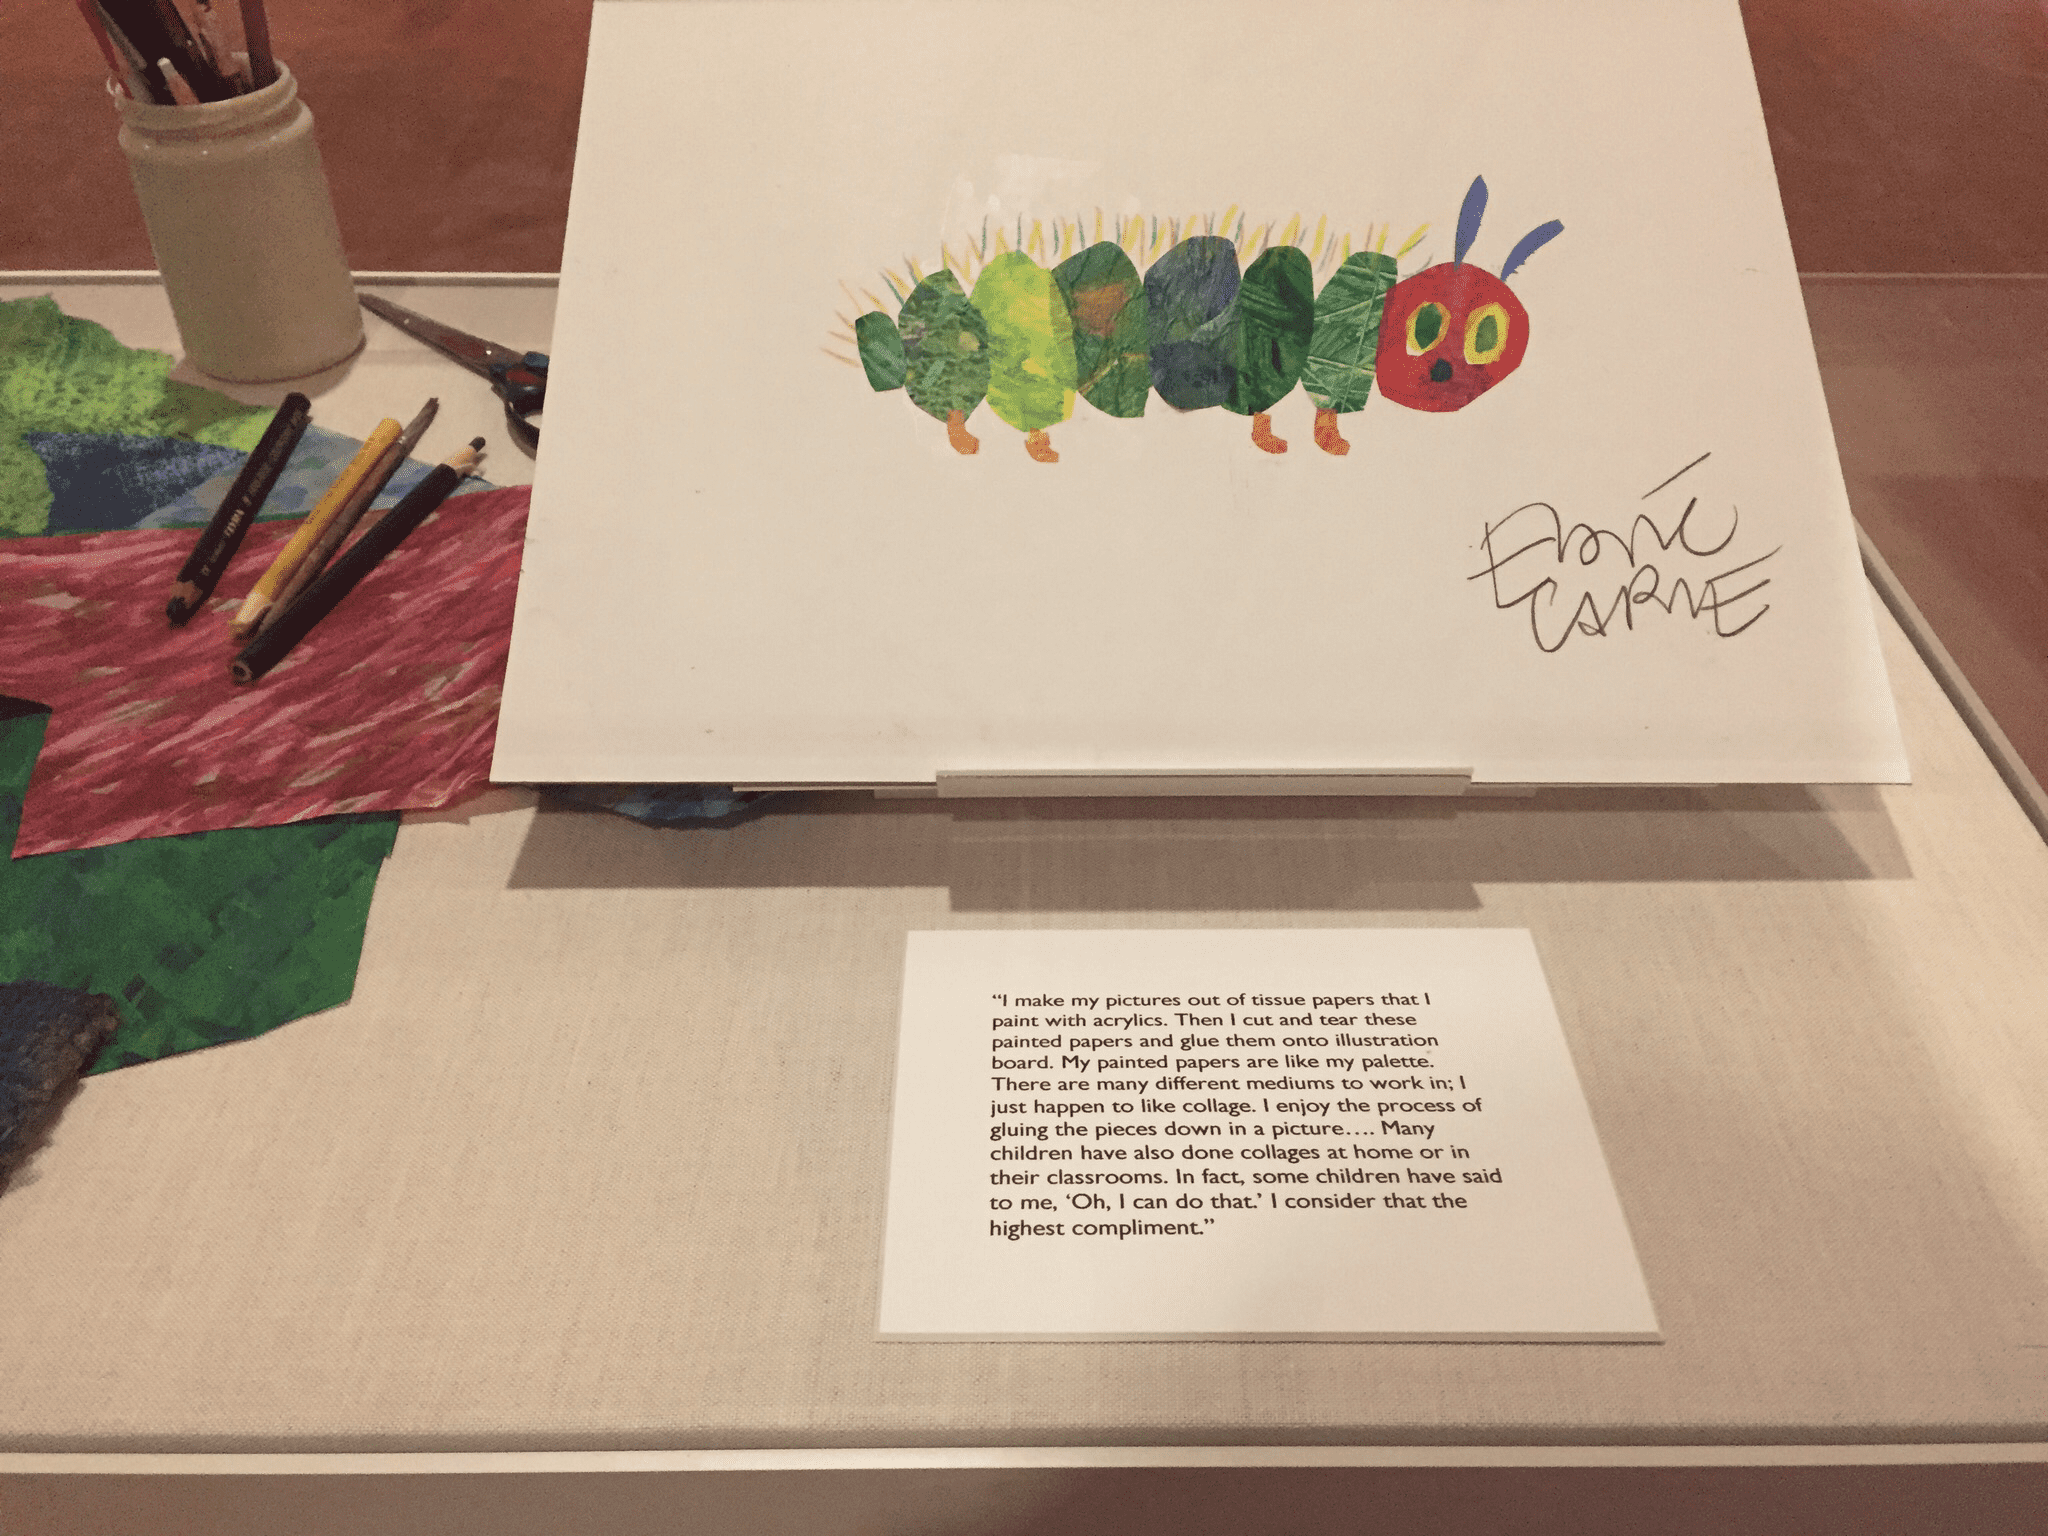 How Eric Carle made his illustrations. The Carle Museum in Amherst, MA